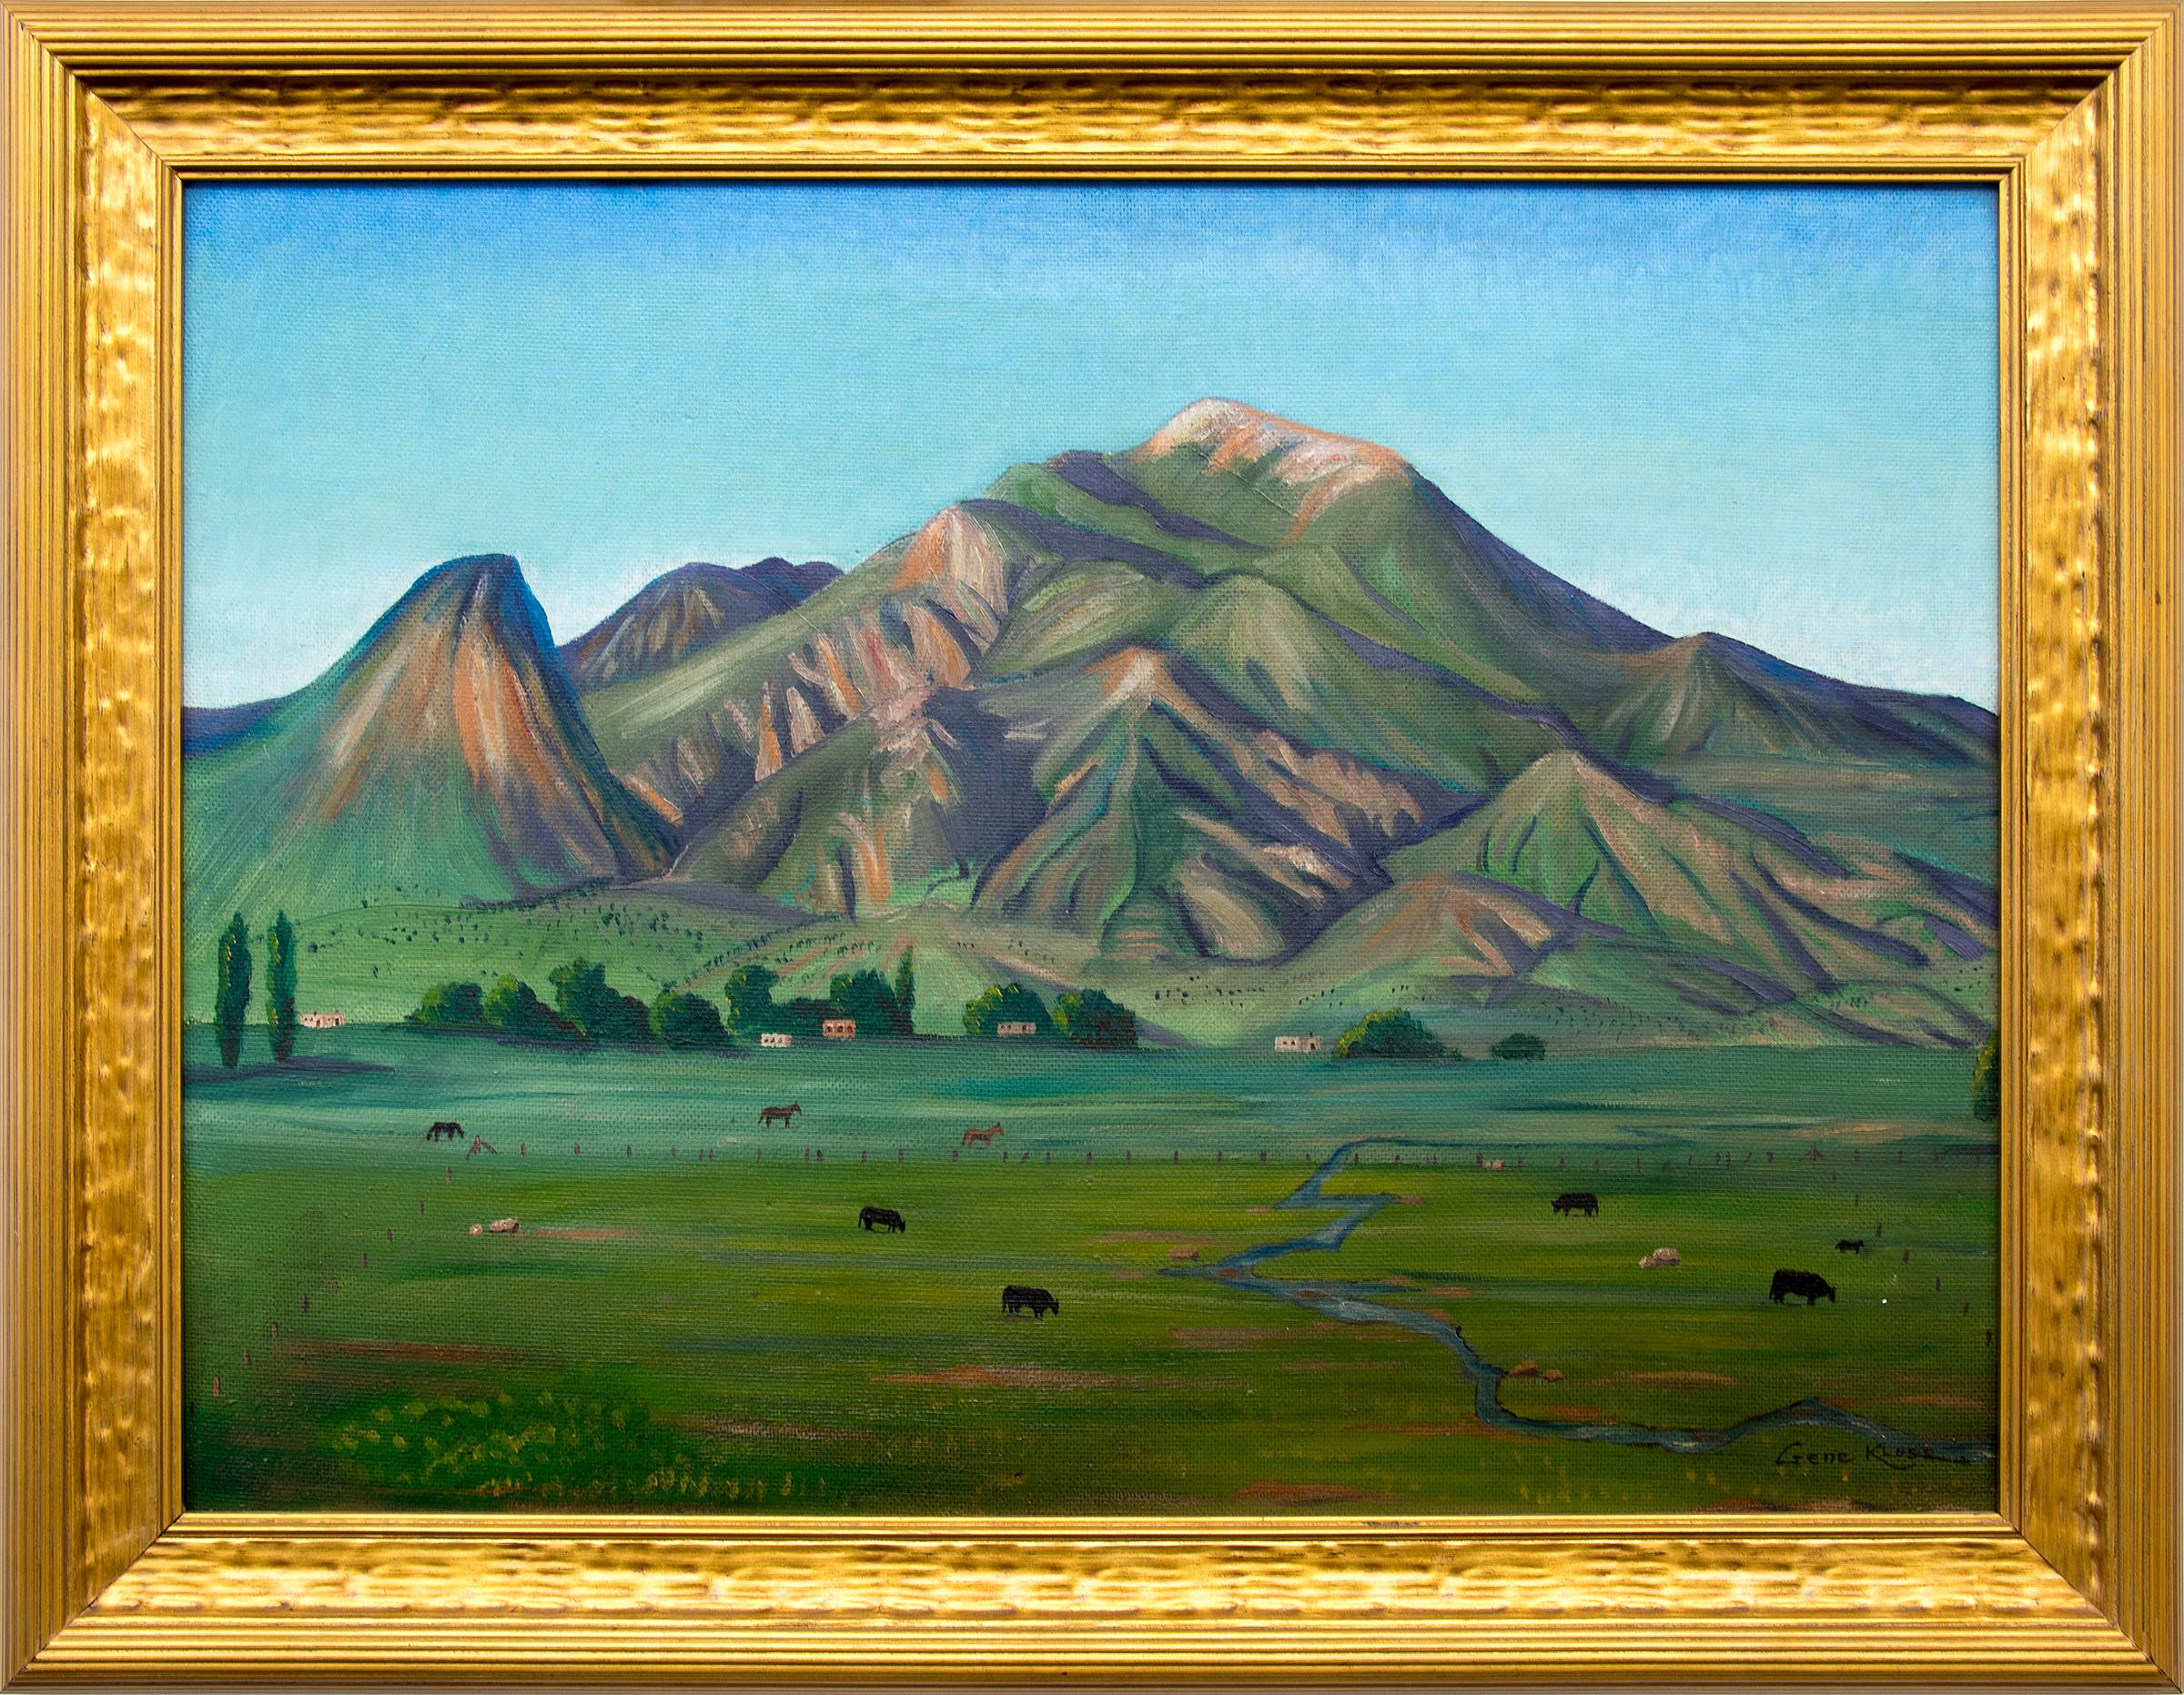 Gene Kloss Landscape Painting - Adobes with Horses, Cattle,  Summer Mountain Landscape, Framed Oil Painting